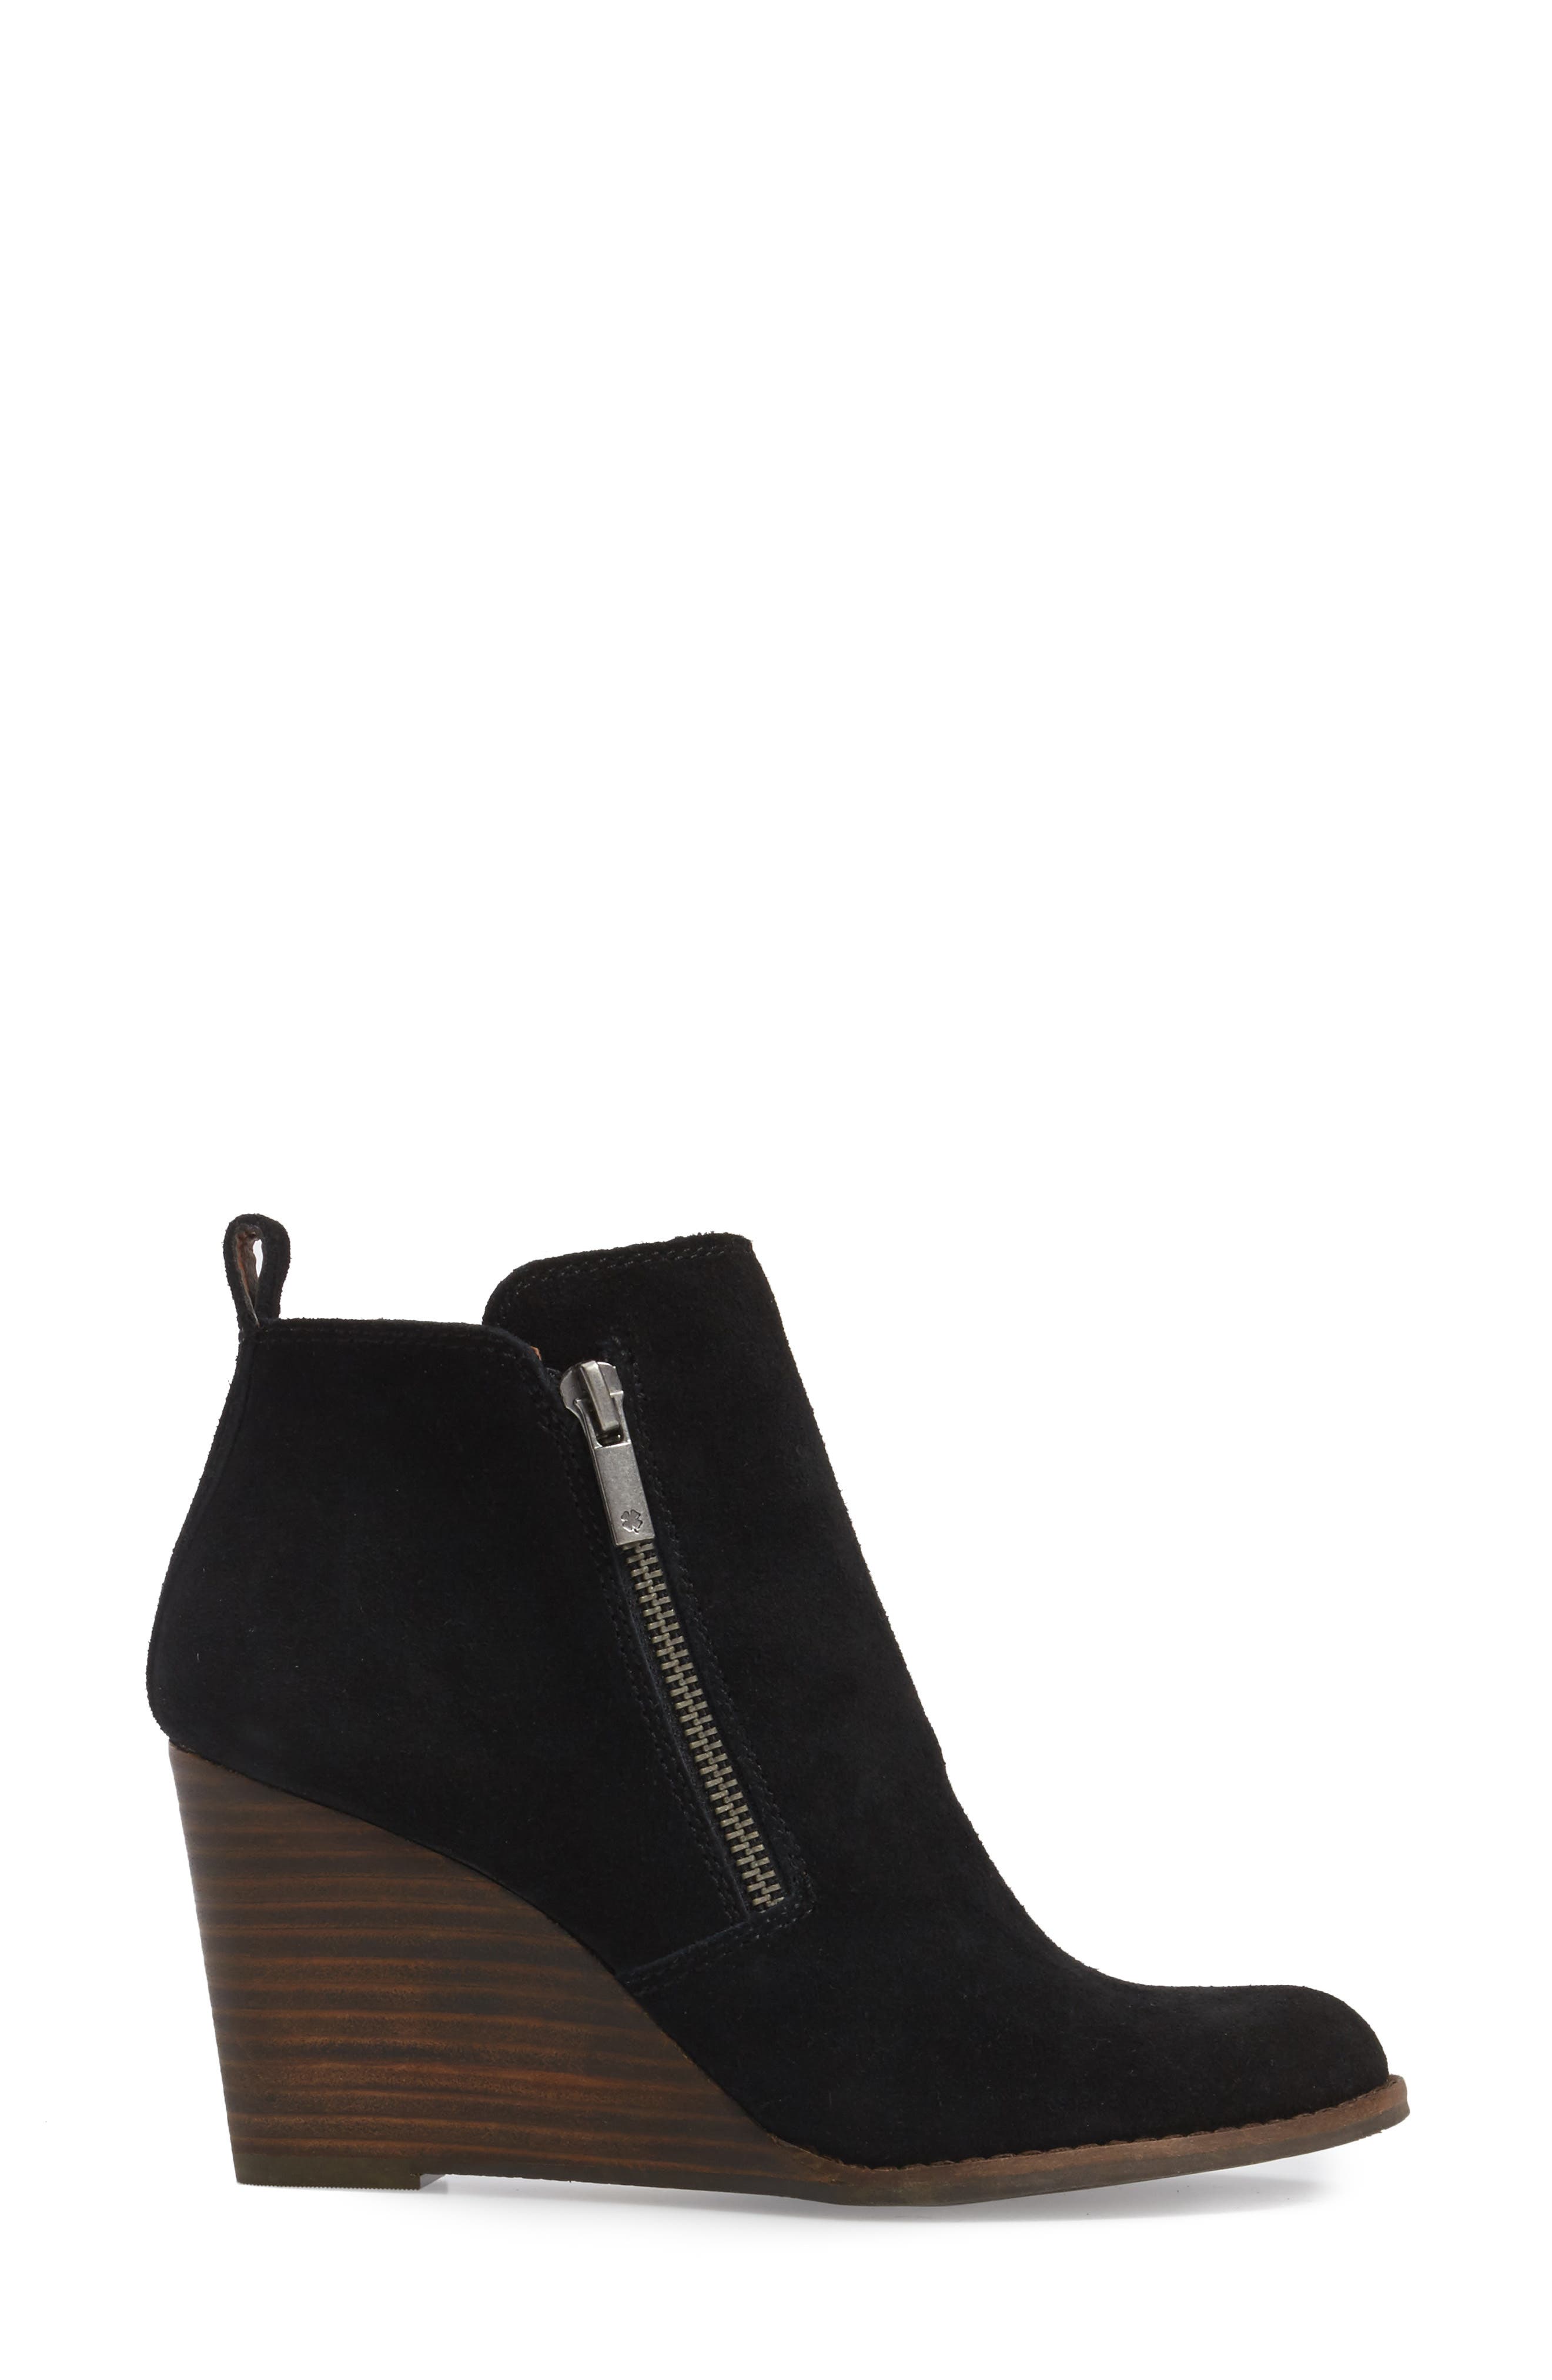 lucky brand wedge ankle boots